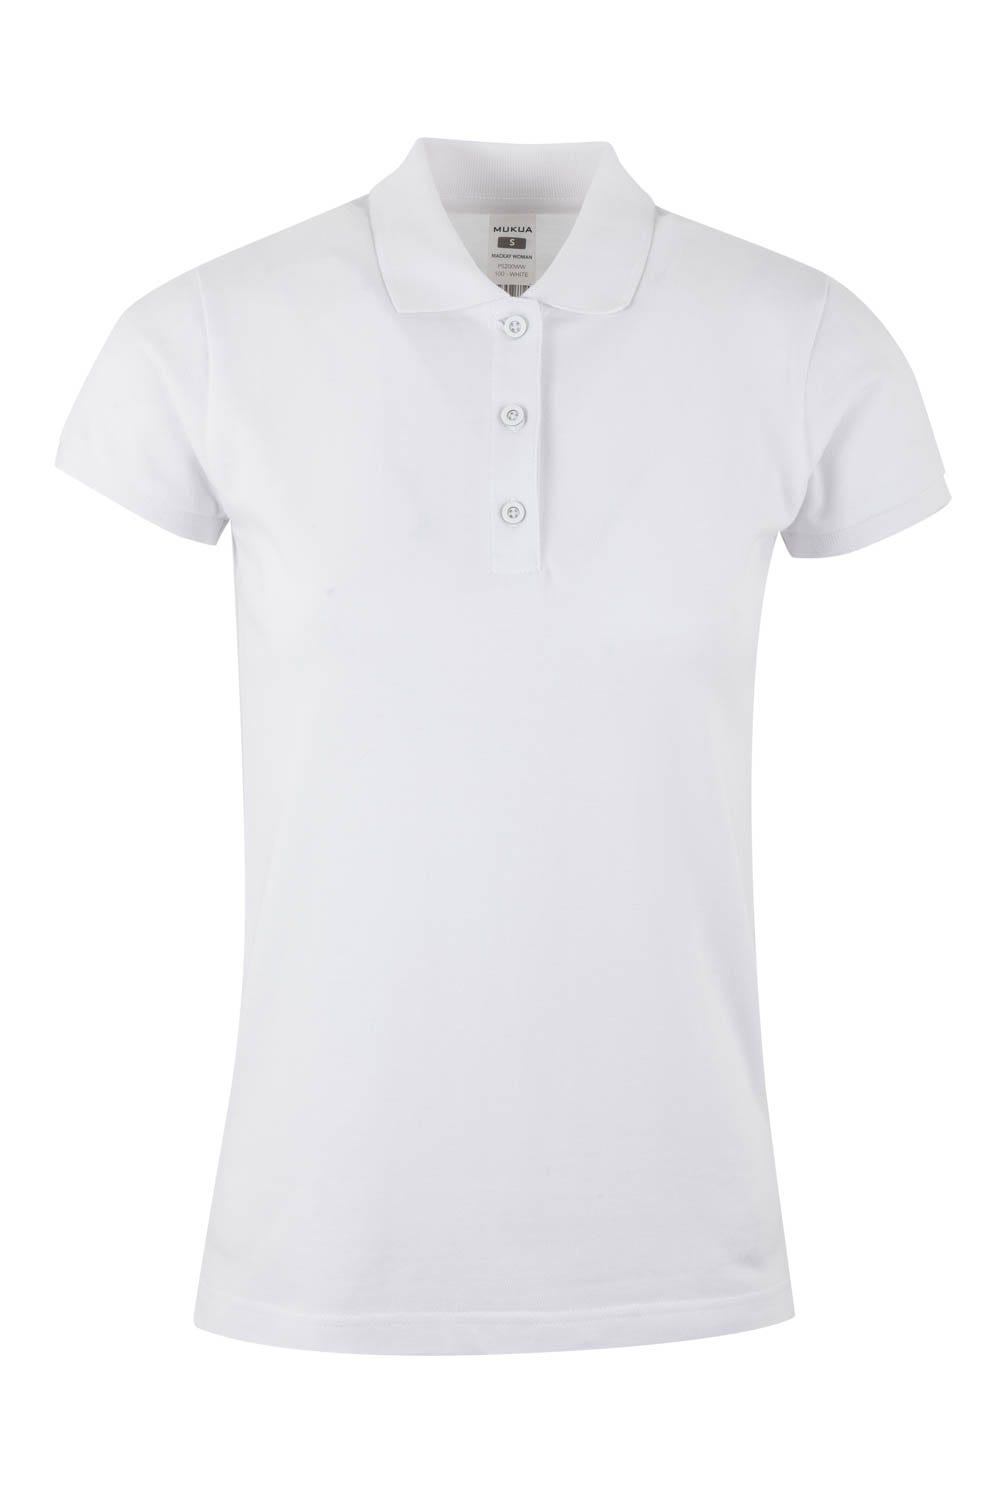 Mukua Ps200wc Polo M C Mujer 210gr AlgodÓn 100% White